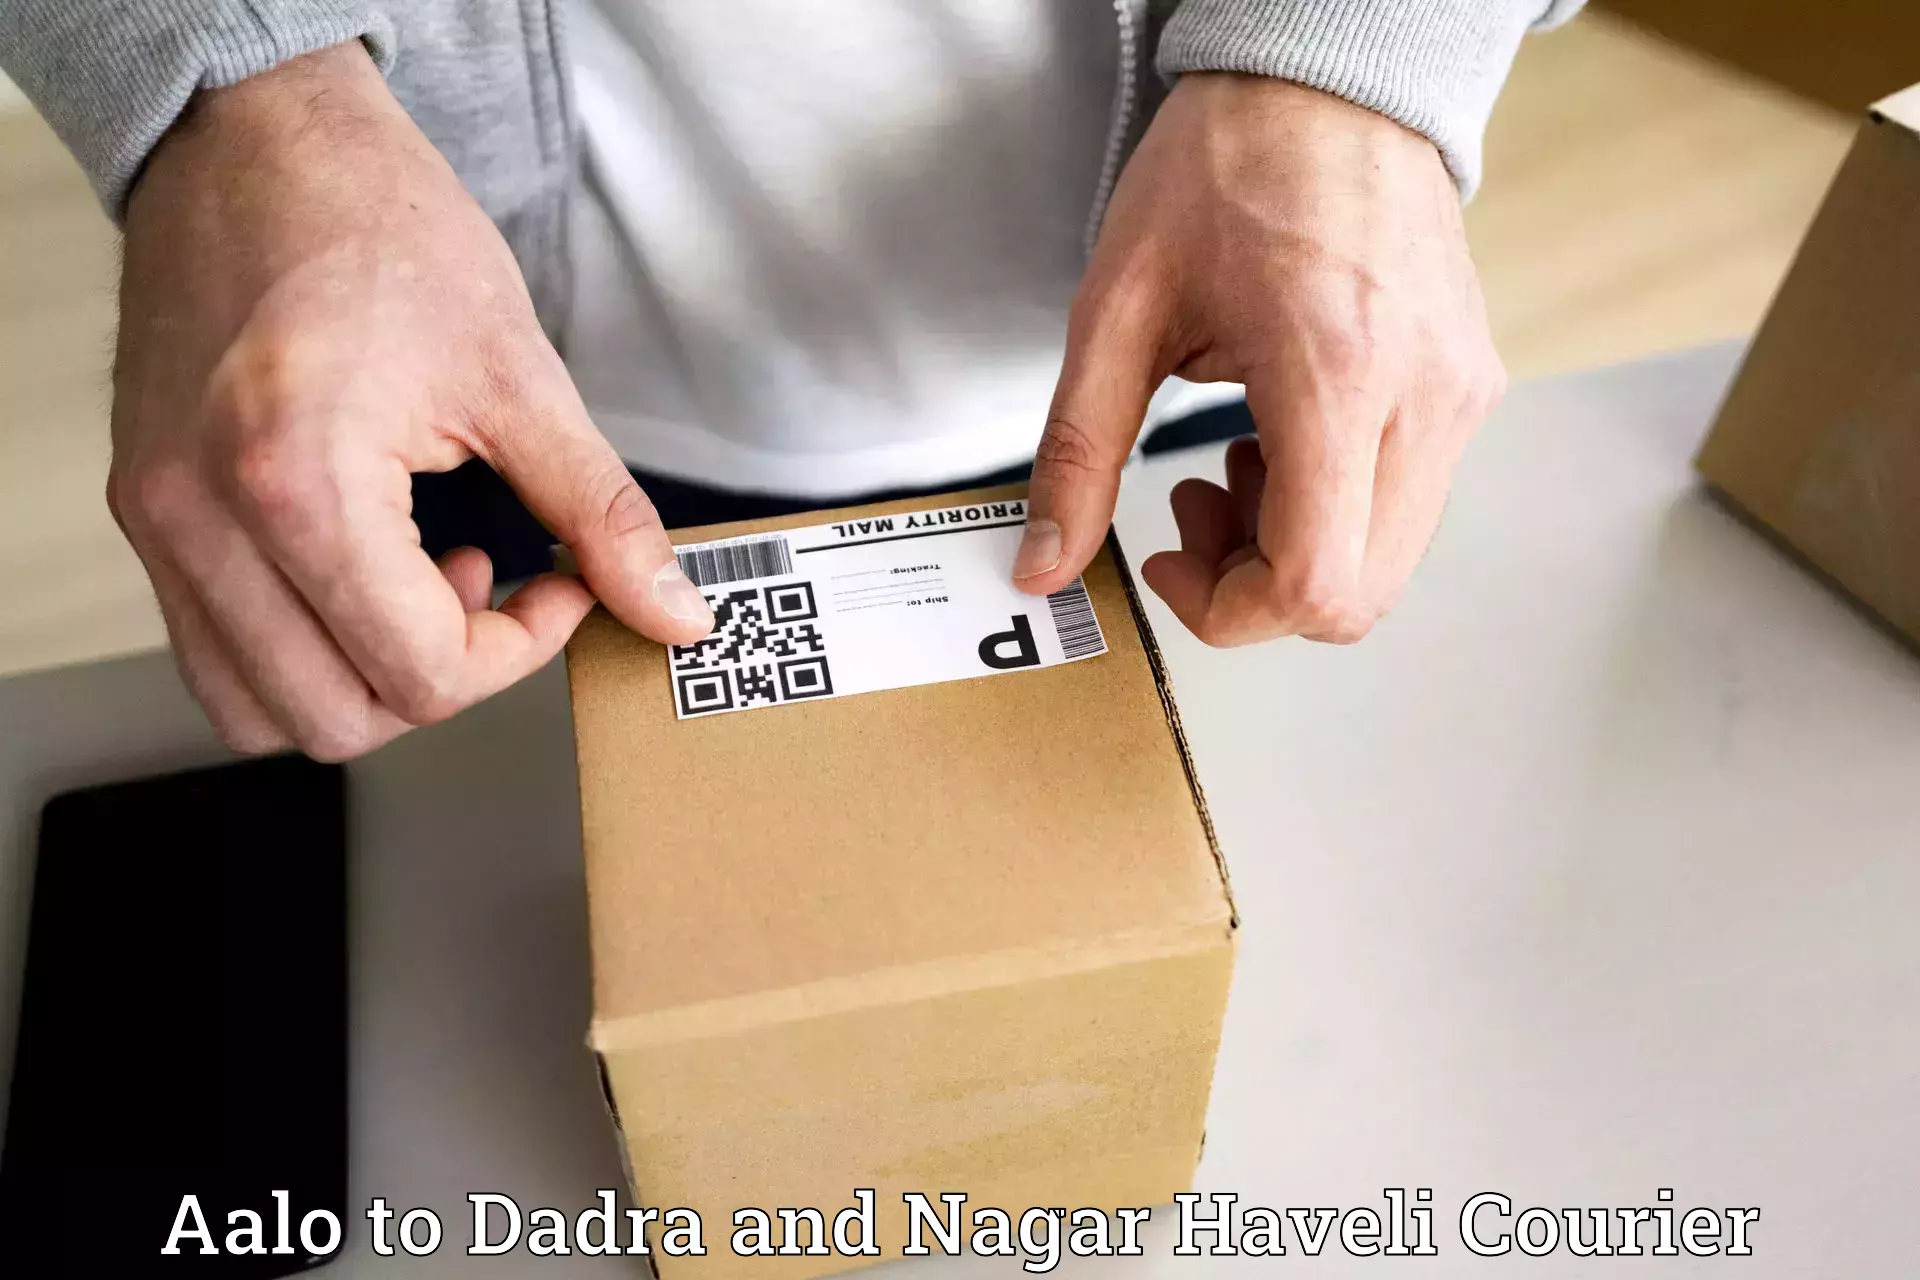 Courier service partnerships Aalo to Dadra and Nagar Haveli